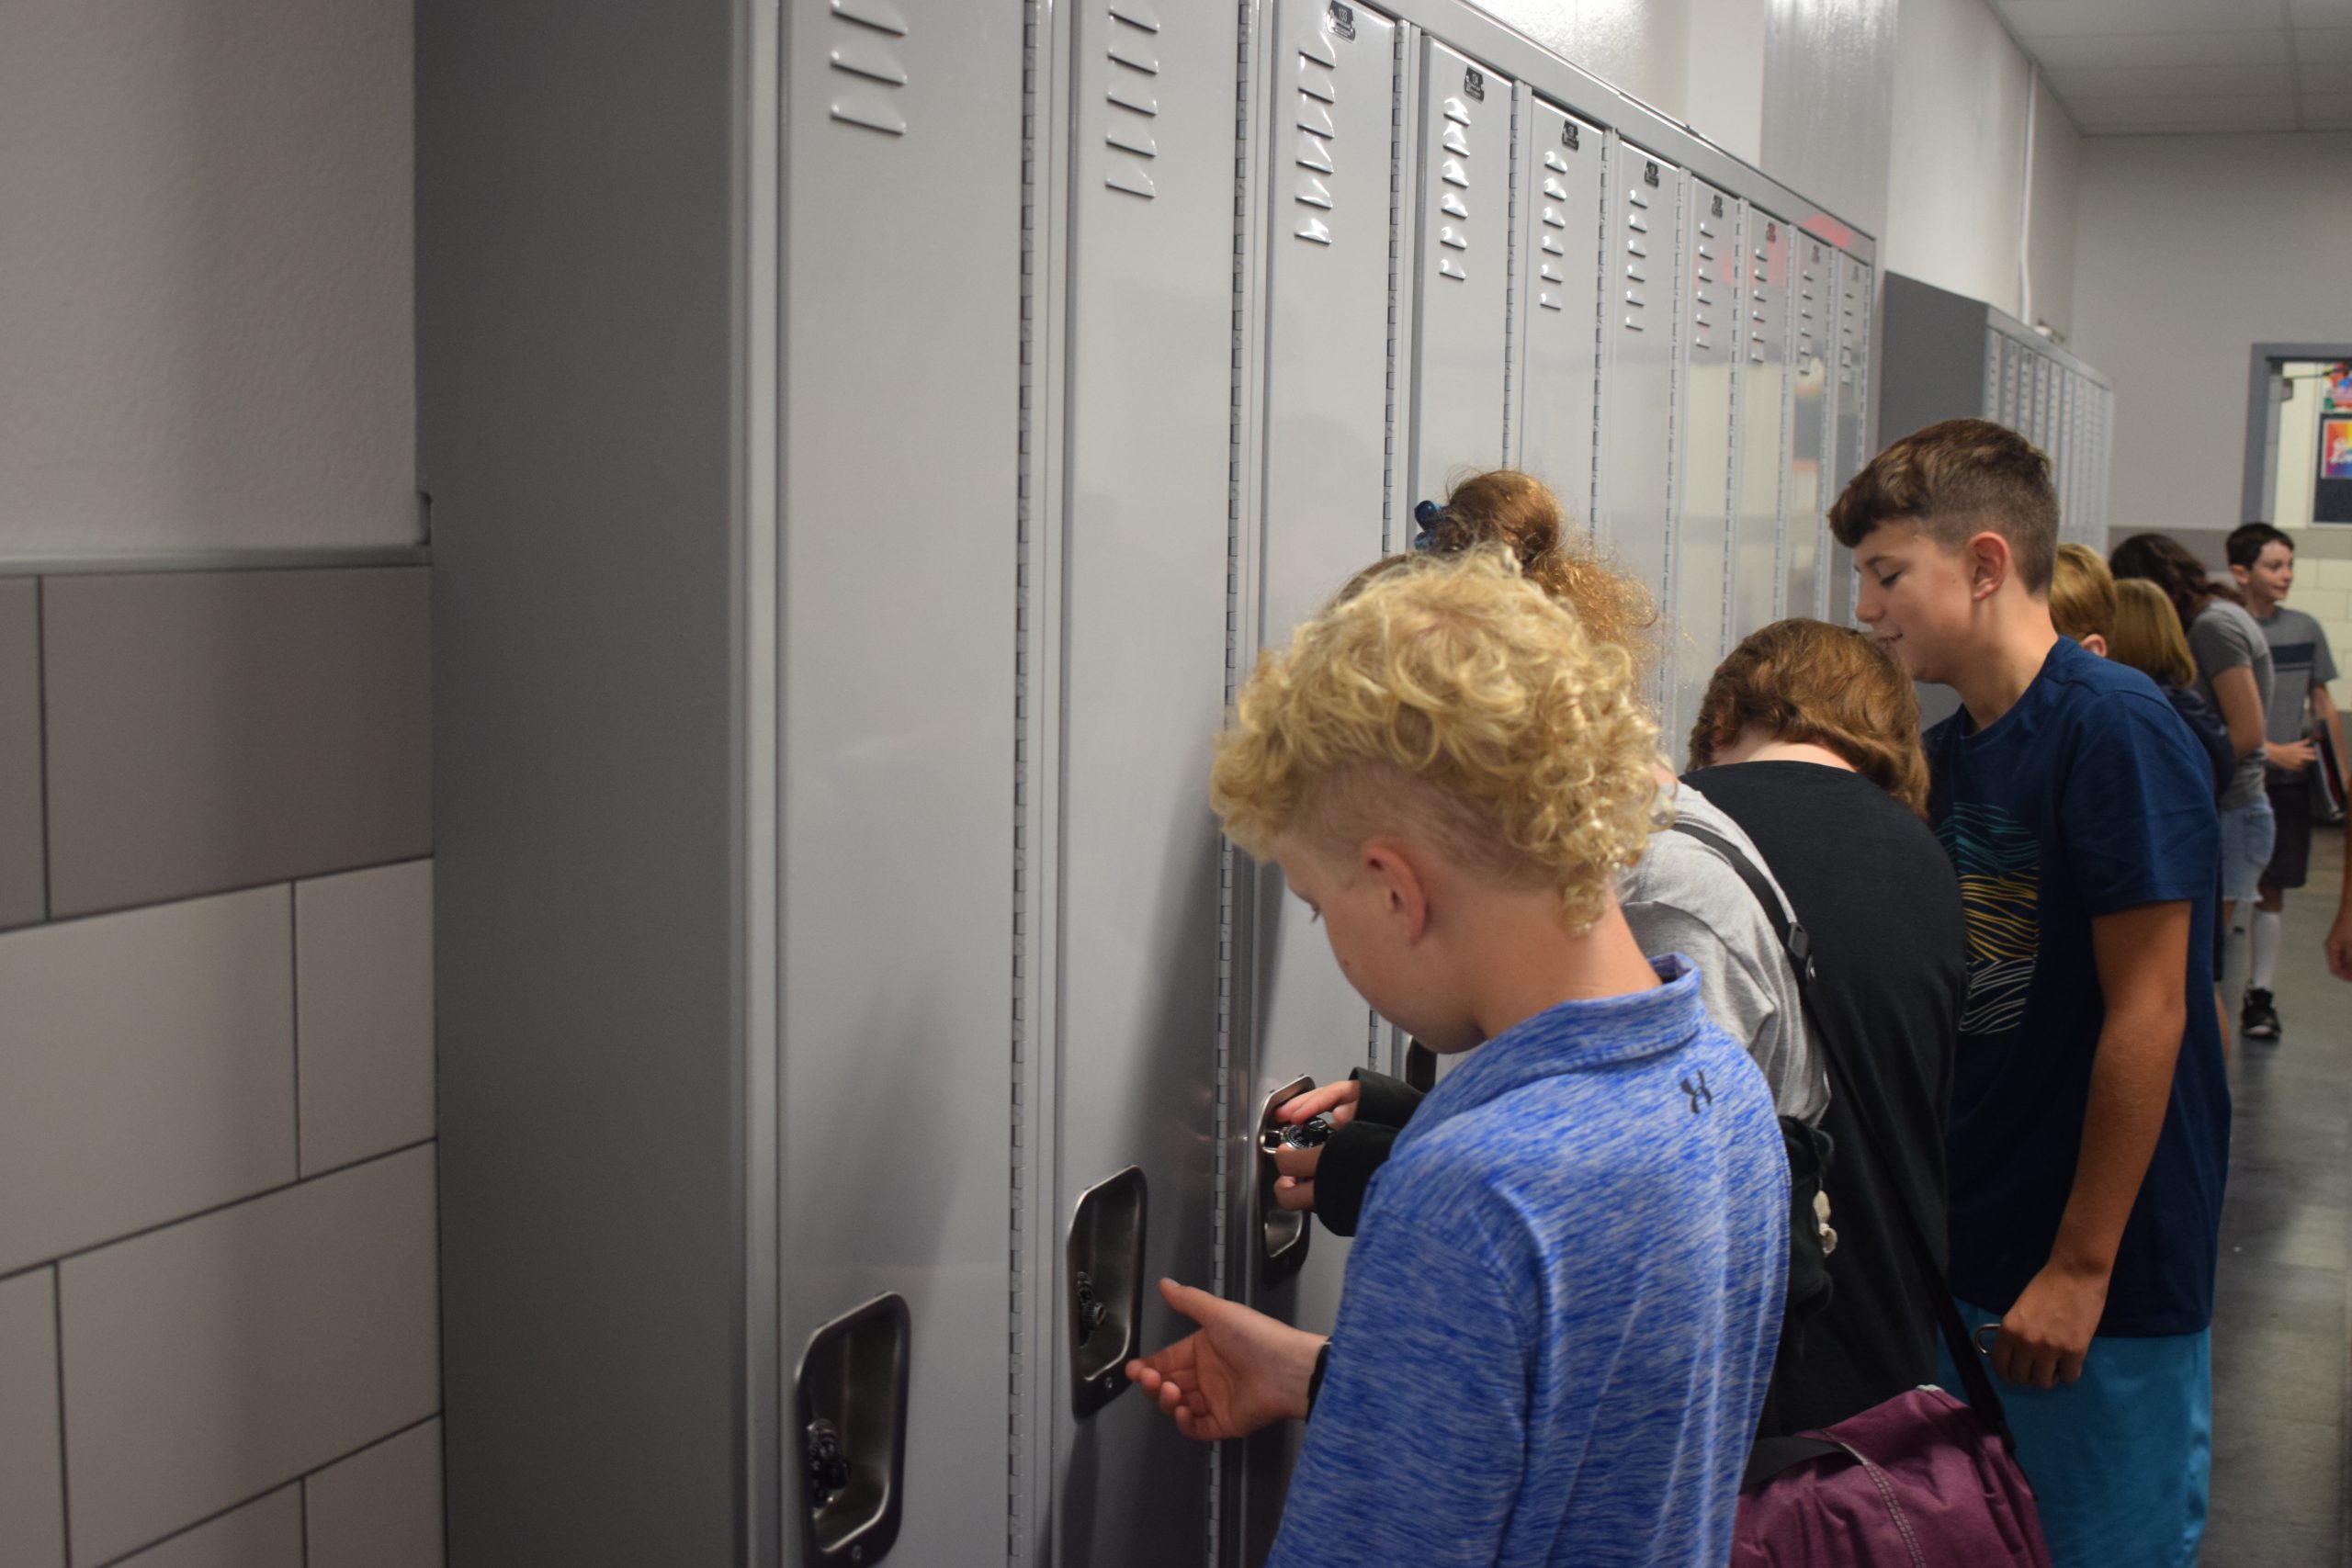 Students access their lockers